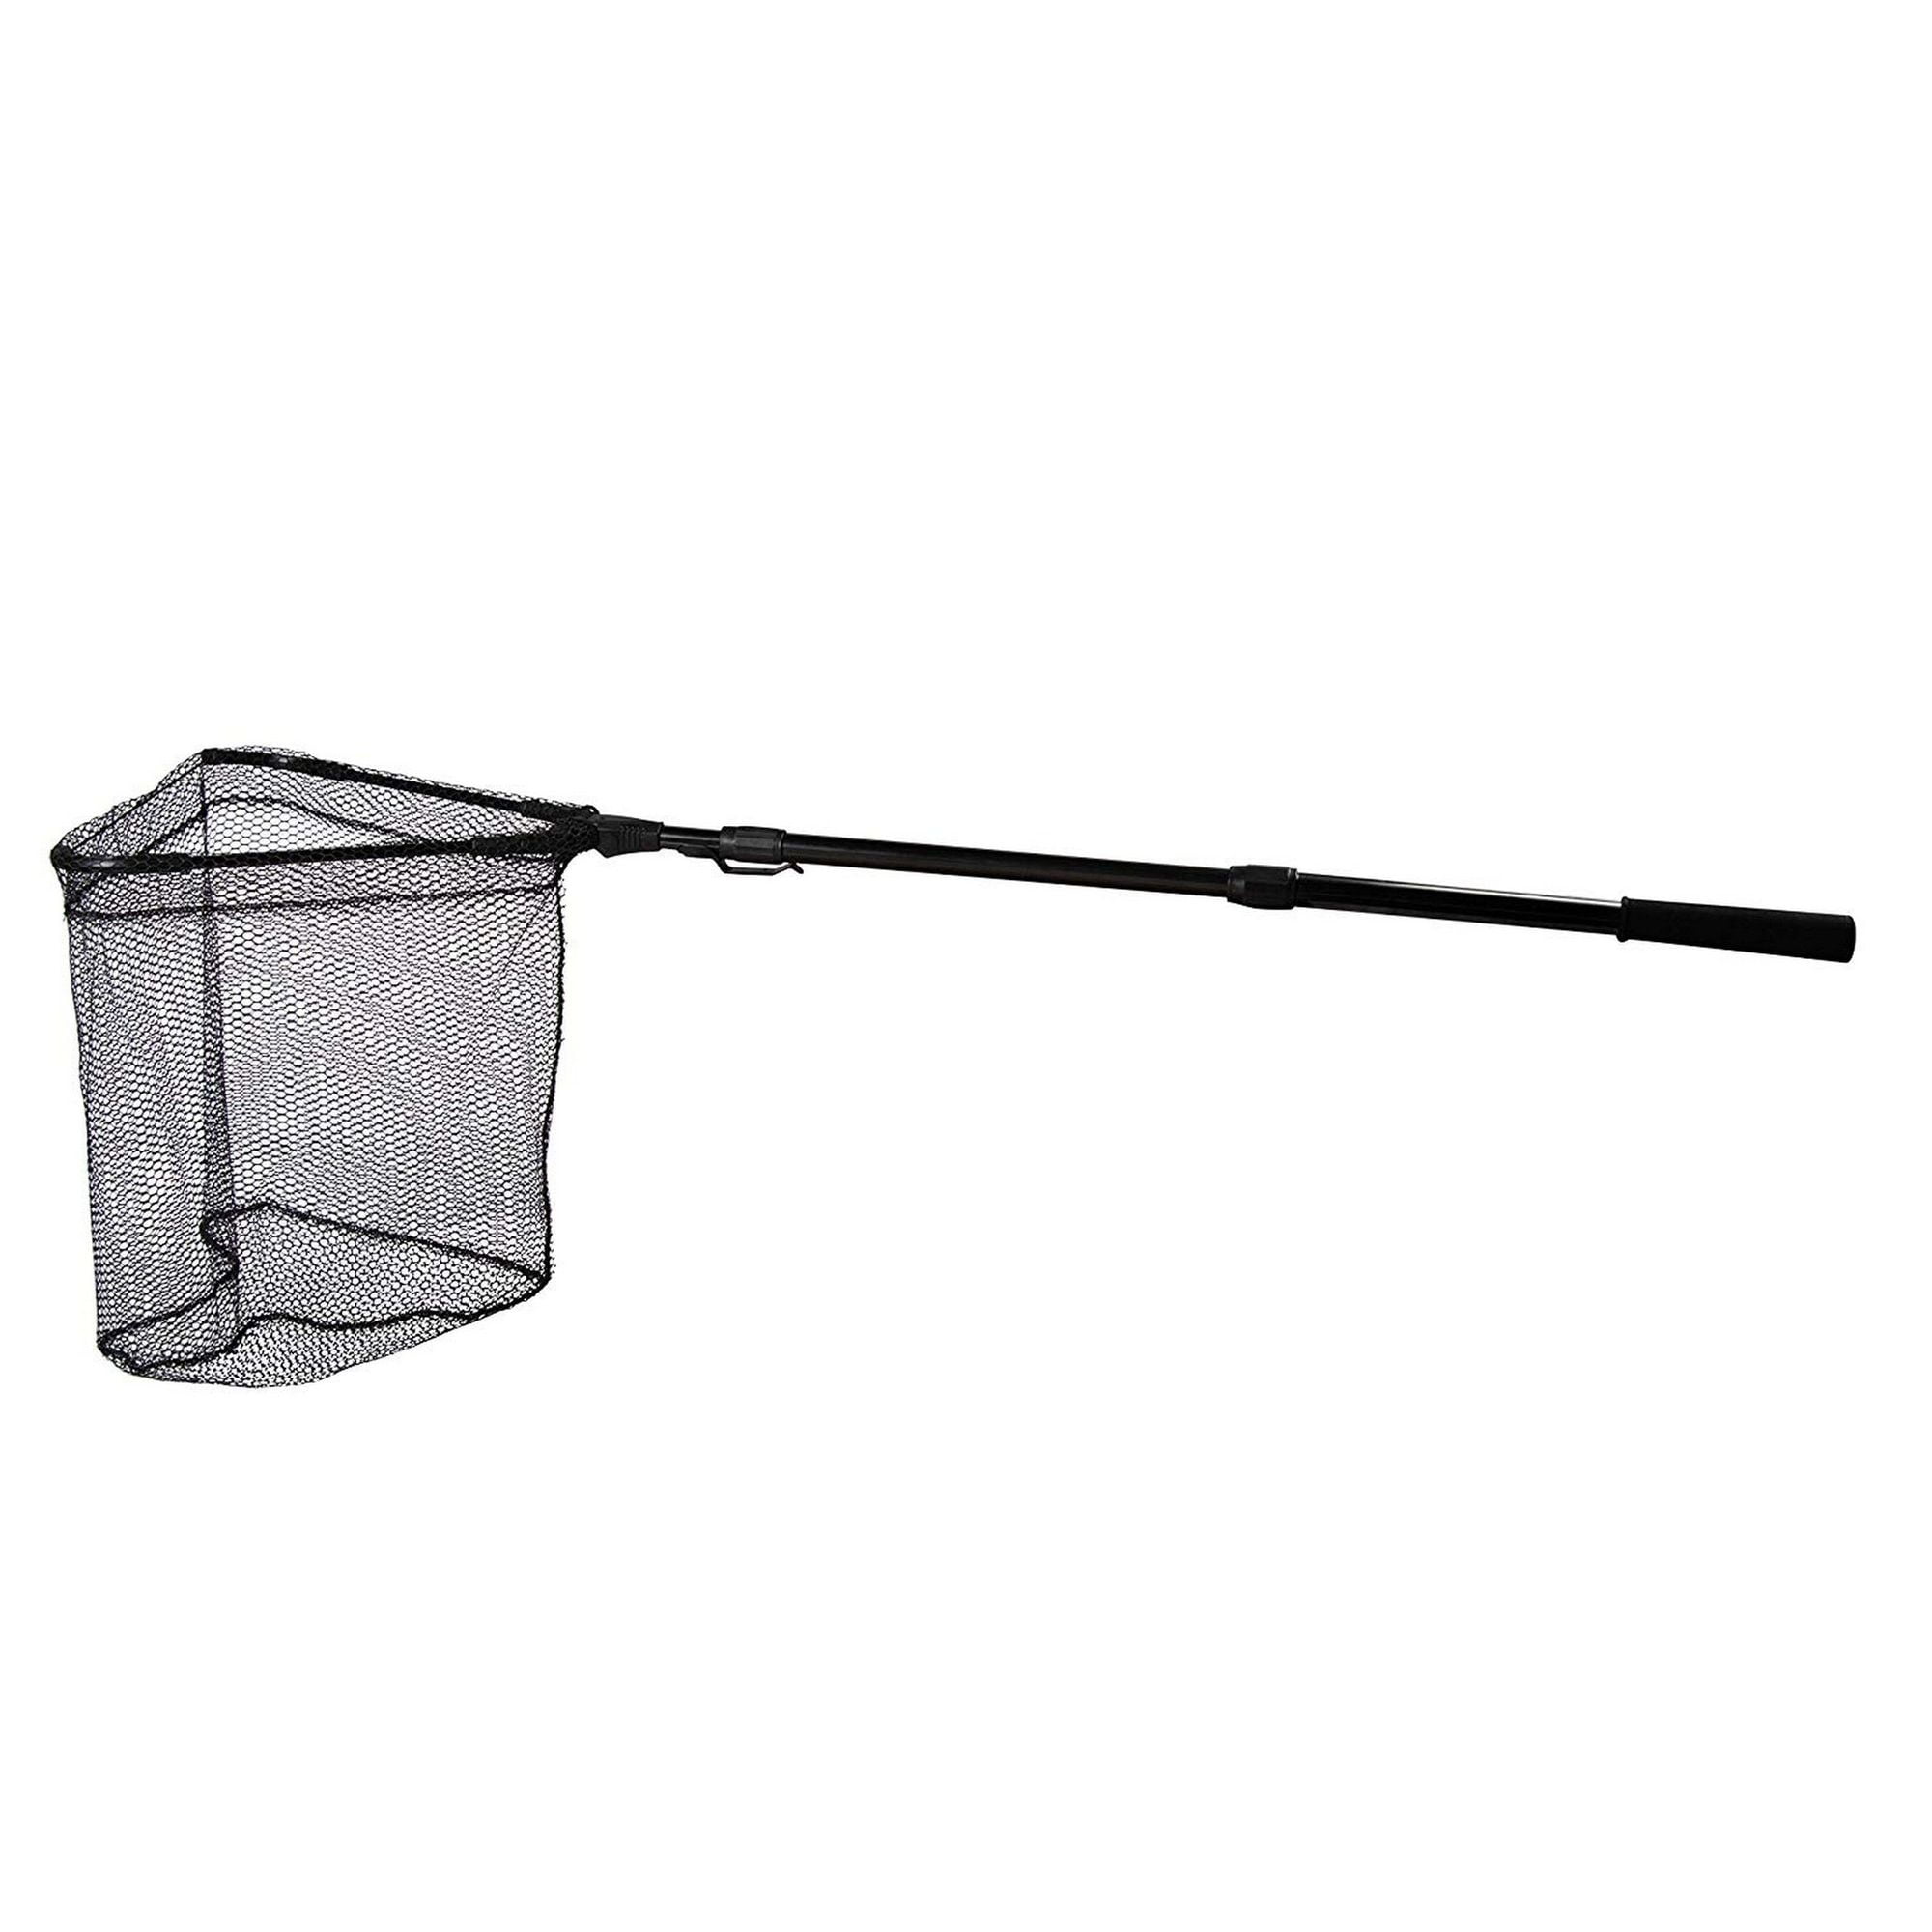 Length Extends to 62 Inches Catch and Release Friendly Juvale Fishing Net with Telescopic Foldable Extendable Pole